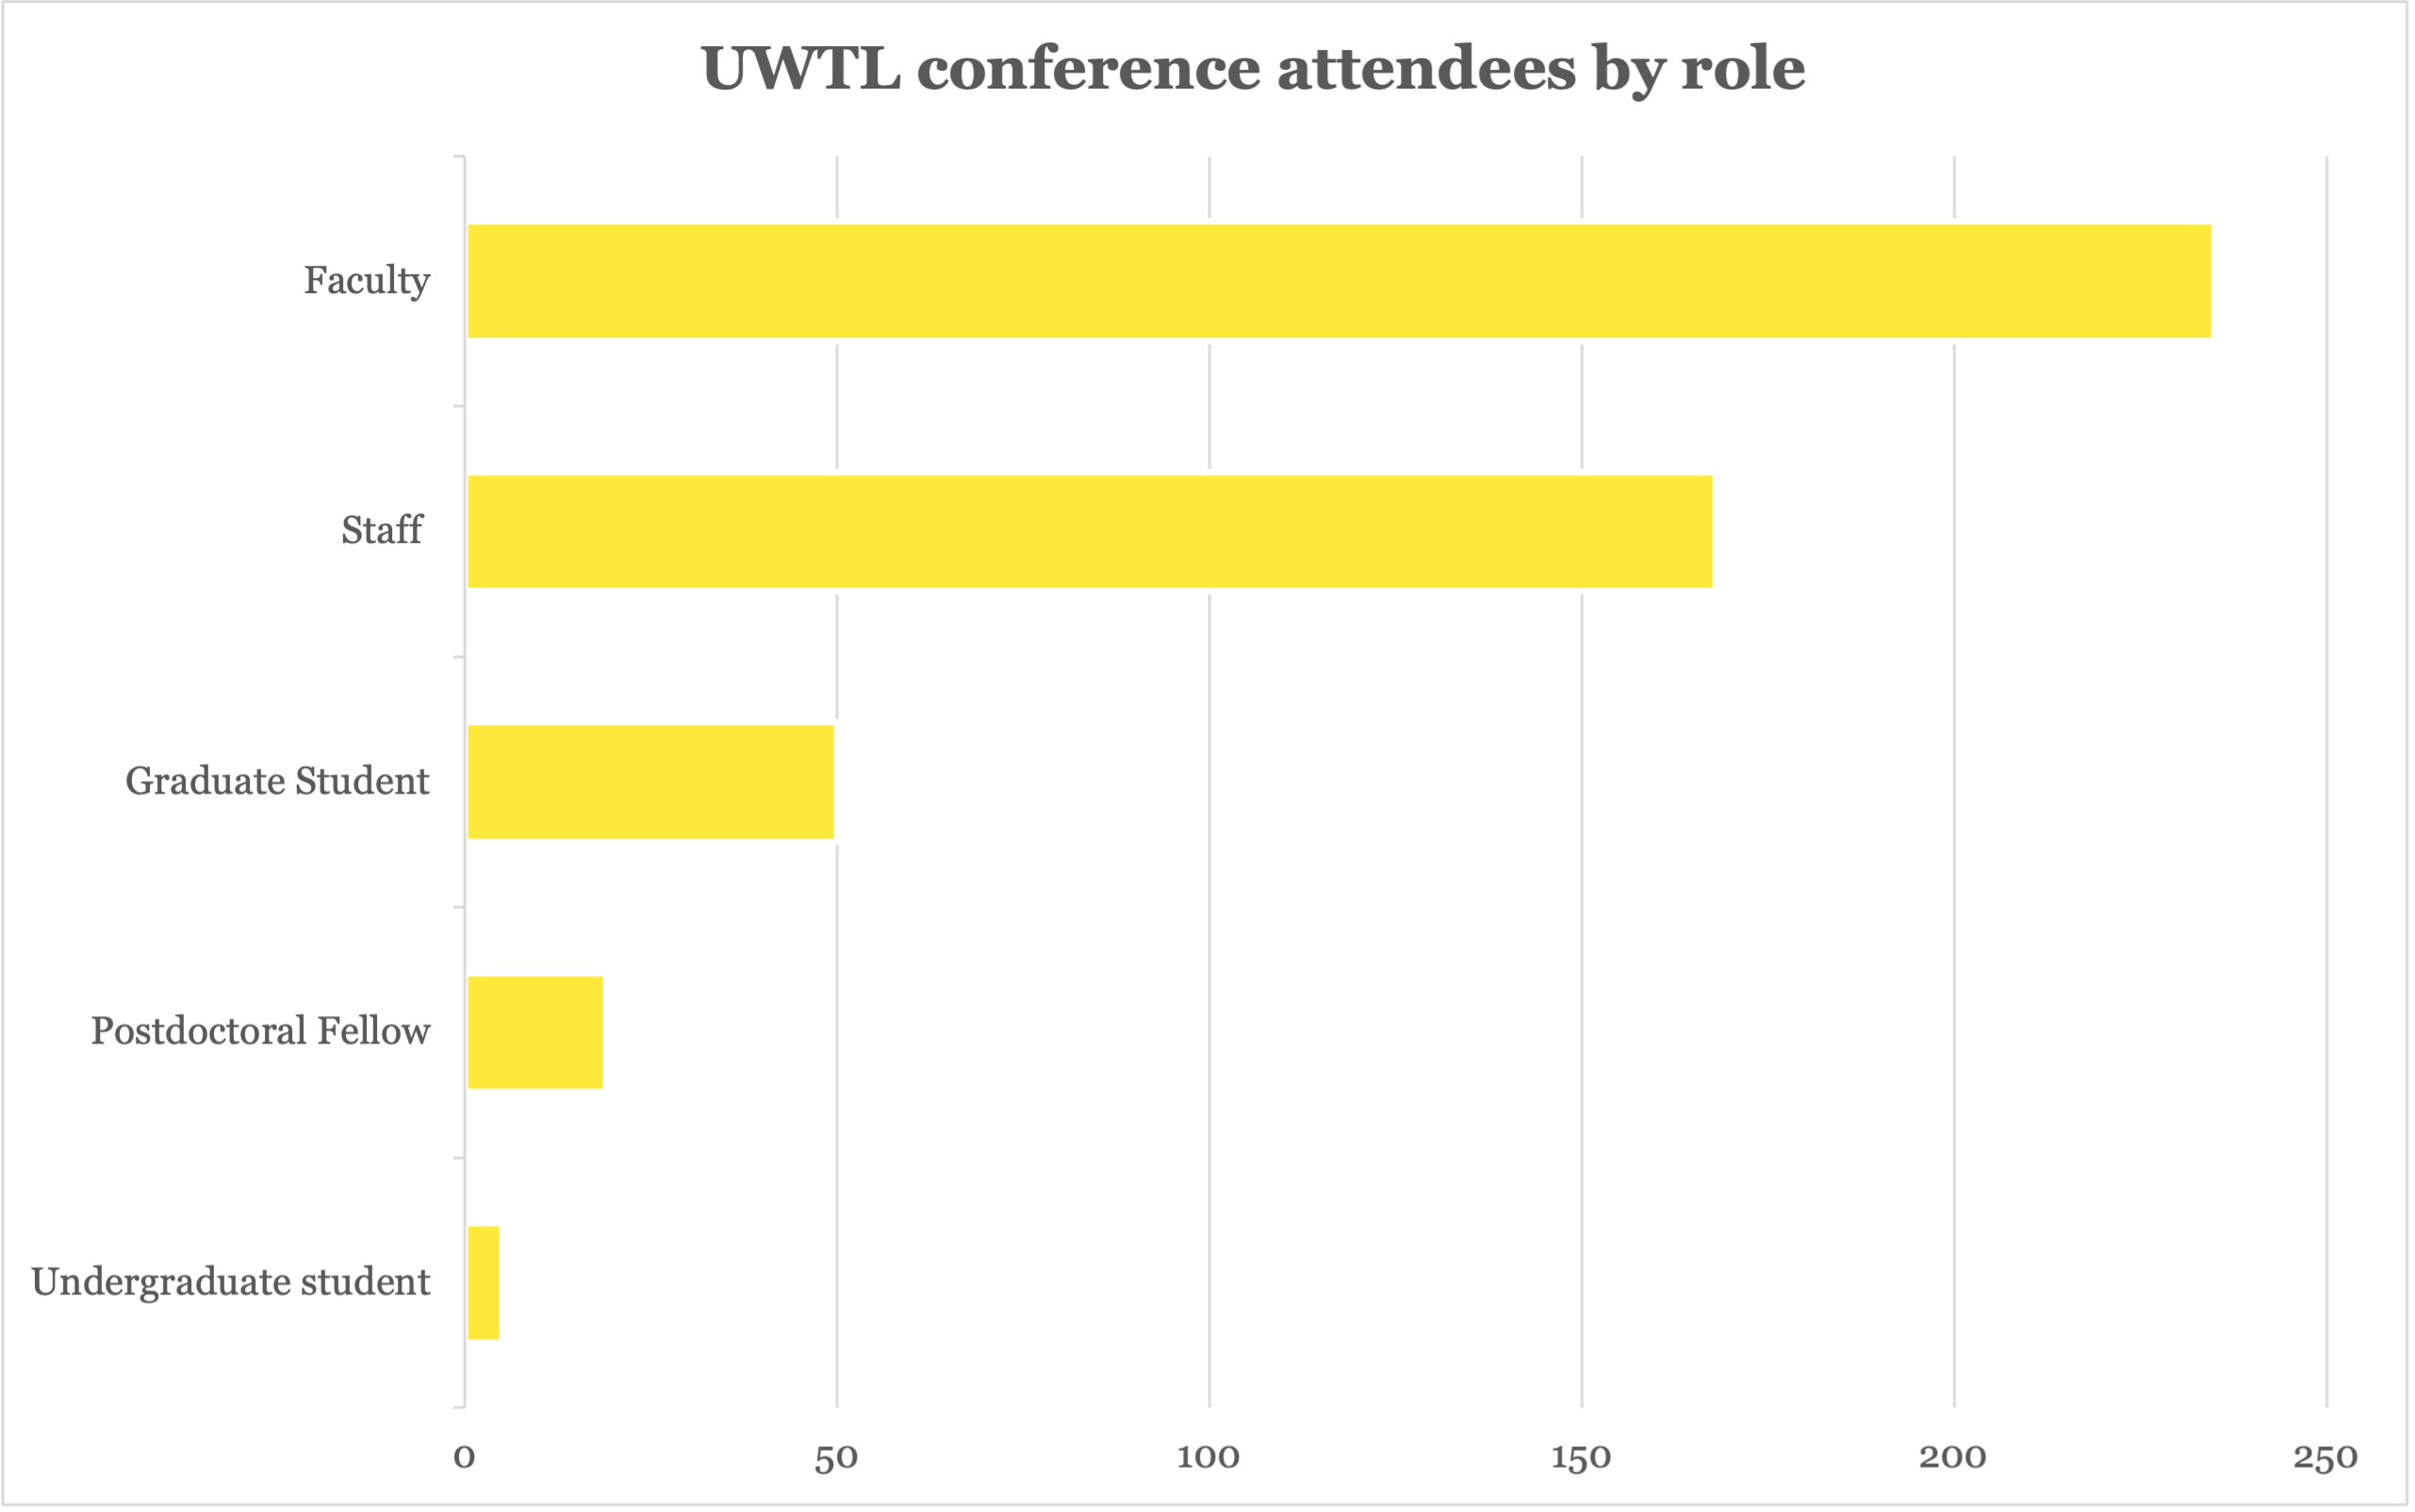 Figure 4. Horizontal bar graph showing the University of Waterloo Teaching and Learning conference attendees by role. Listed in order of highest to lowest, 235 faculty members, 168 staff members, 50 graduate students, 19 postdoctoral fellows and 5 undergraduate students attended. These data include internal and external attendees. 